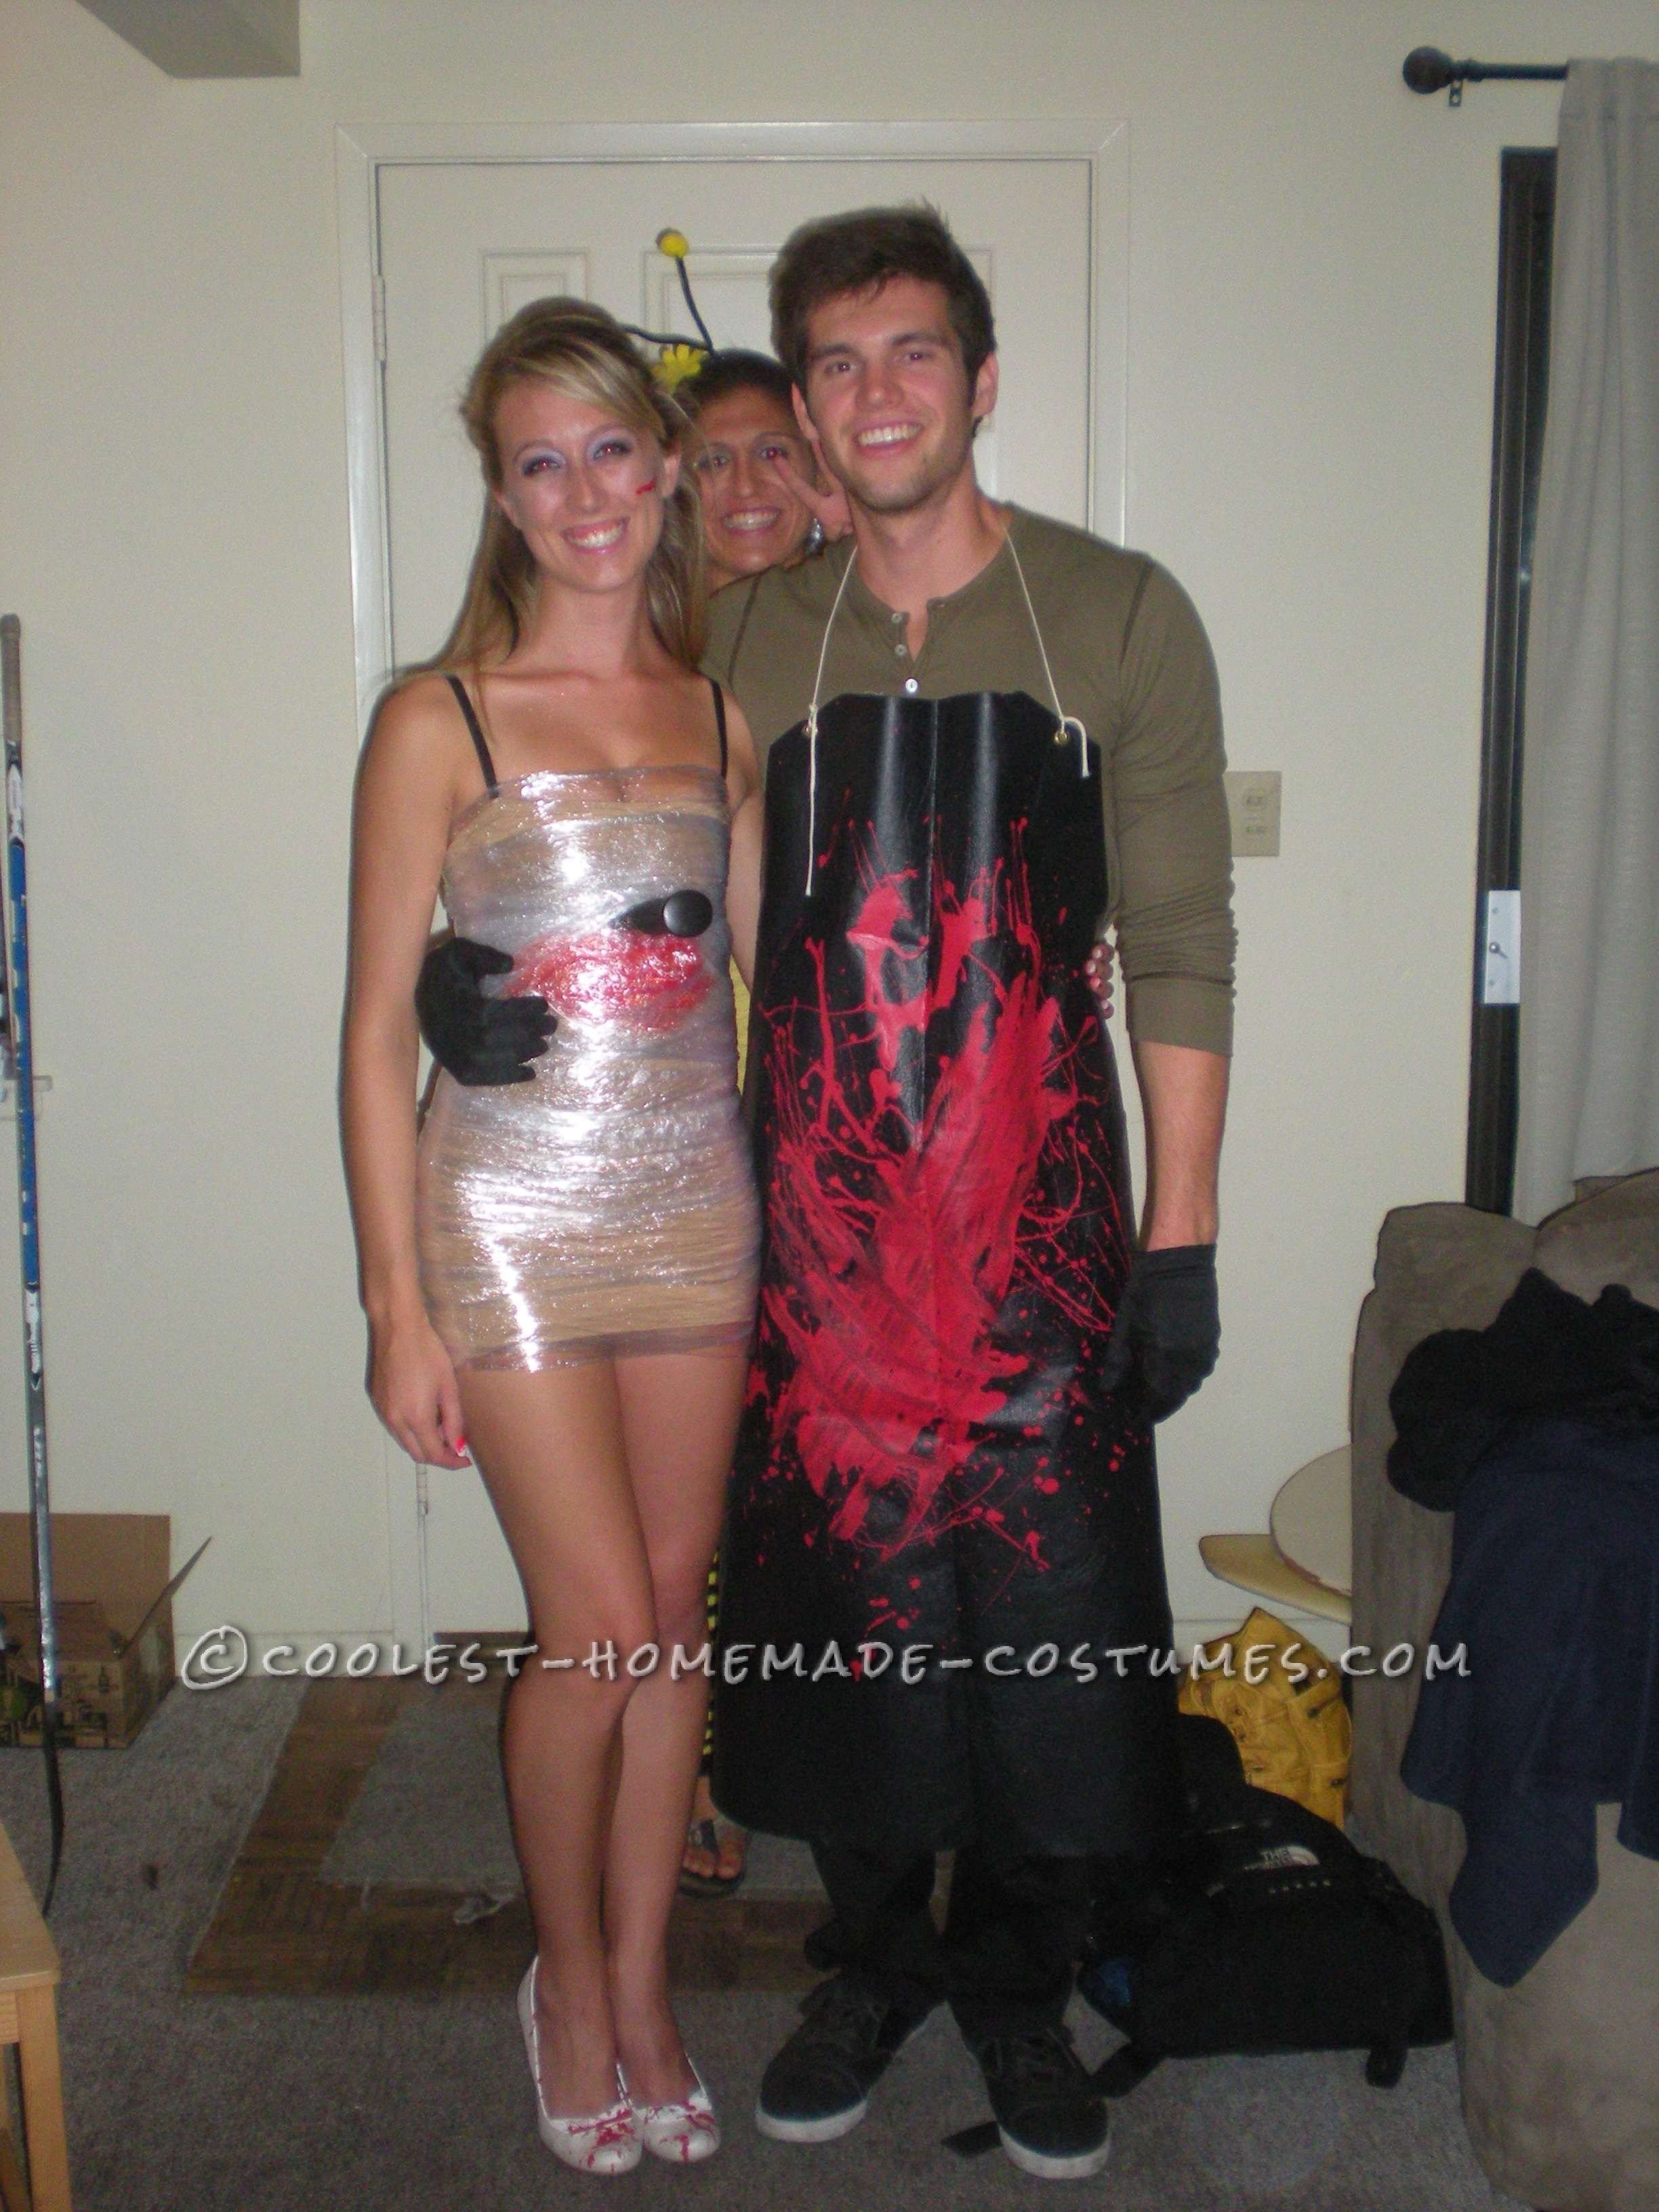 10 Most Recommended Couples Homemade Halloween Costume Ideas cheap and easy to make dexter couple costume dexter costumes dexter 2022